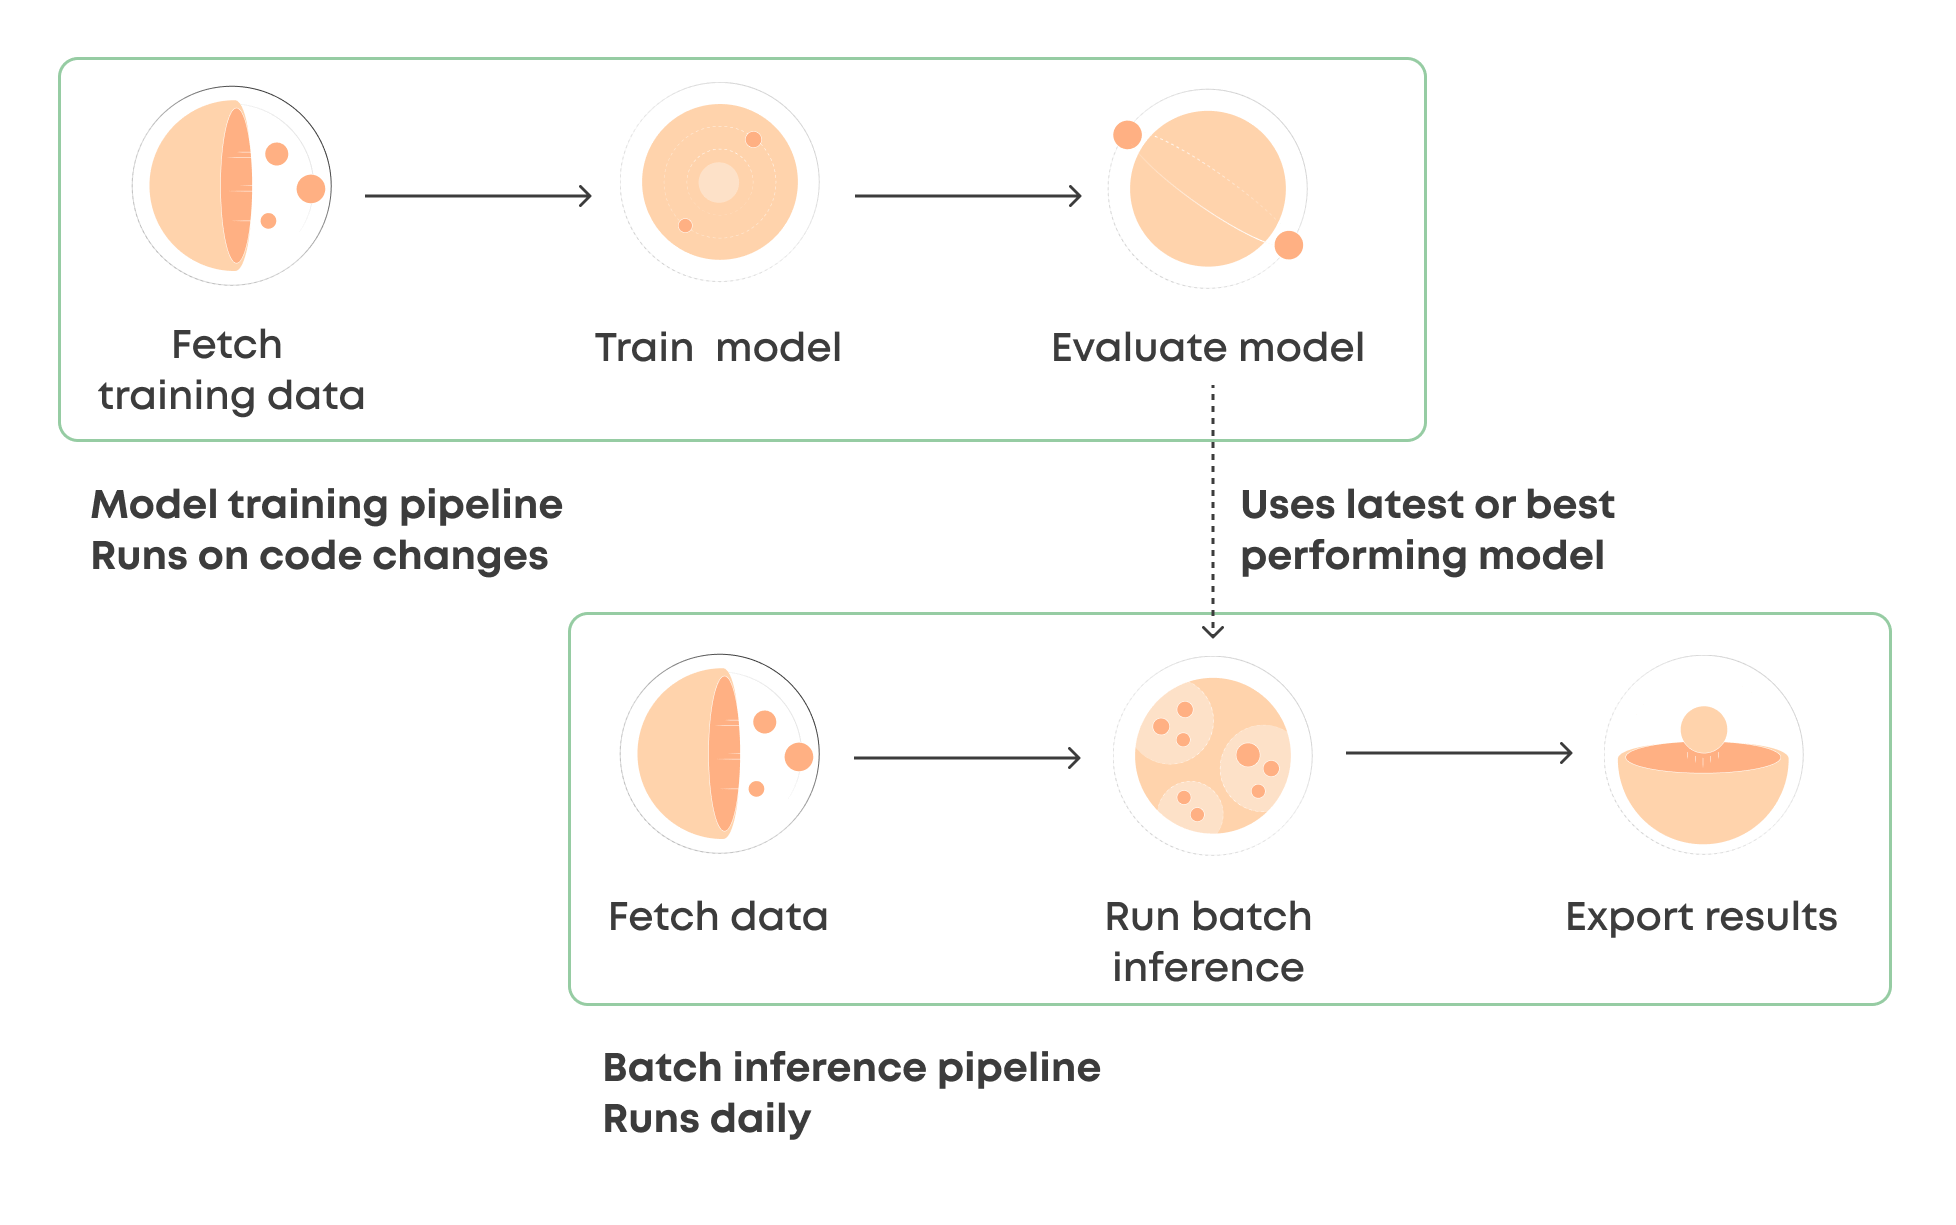 Pipelines for Batch Inference